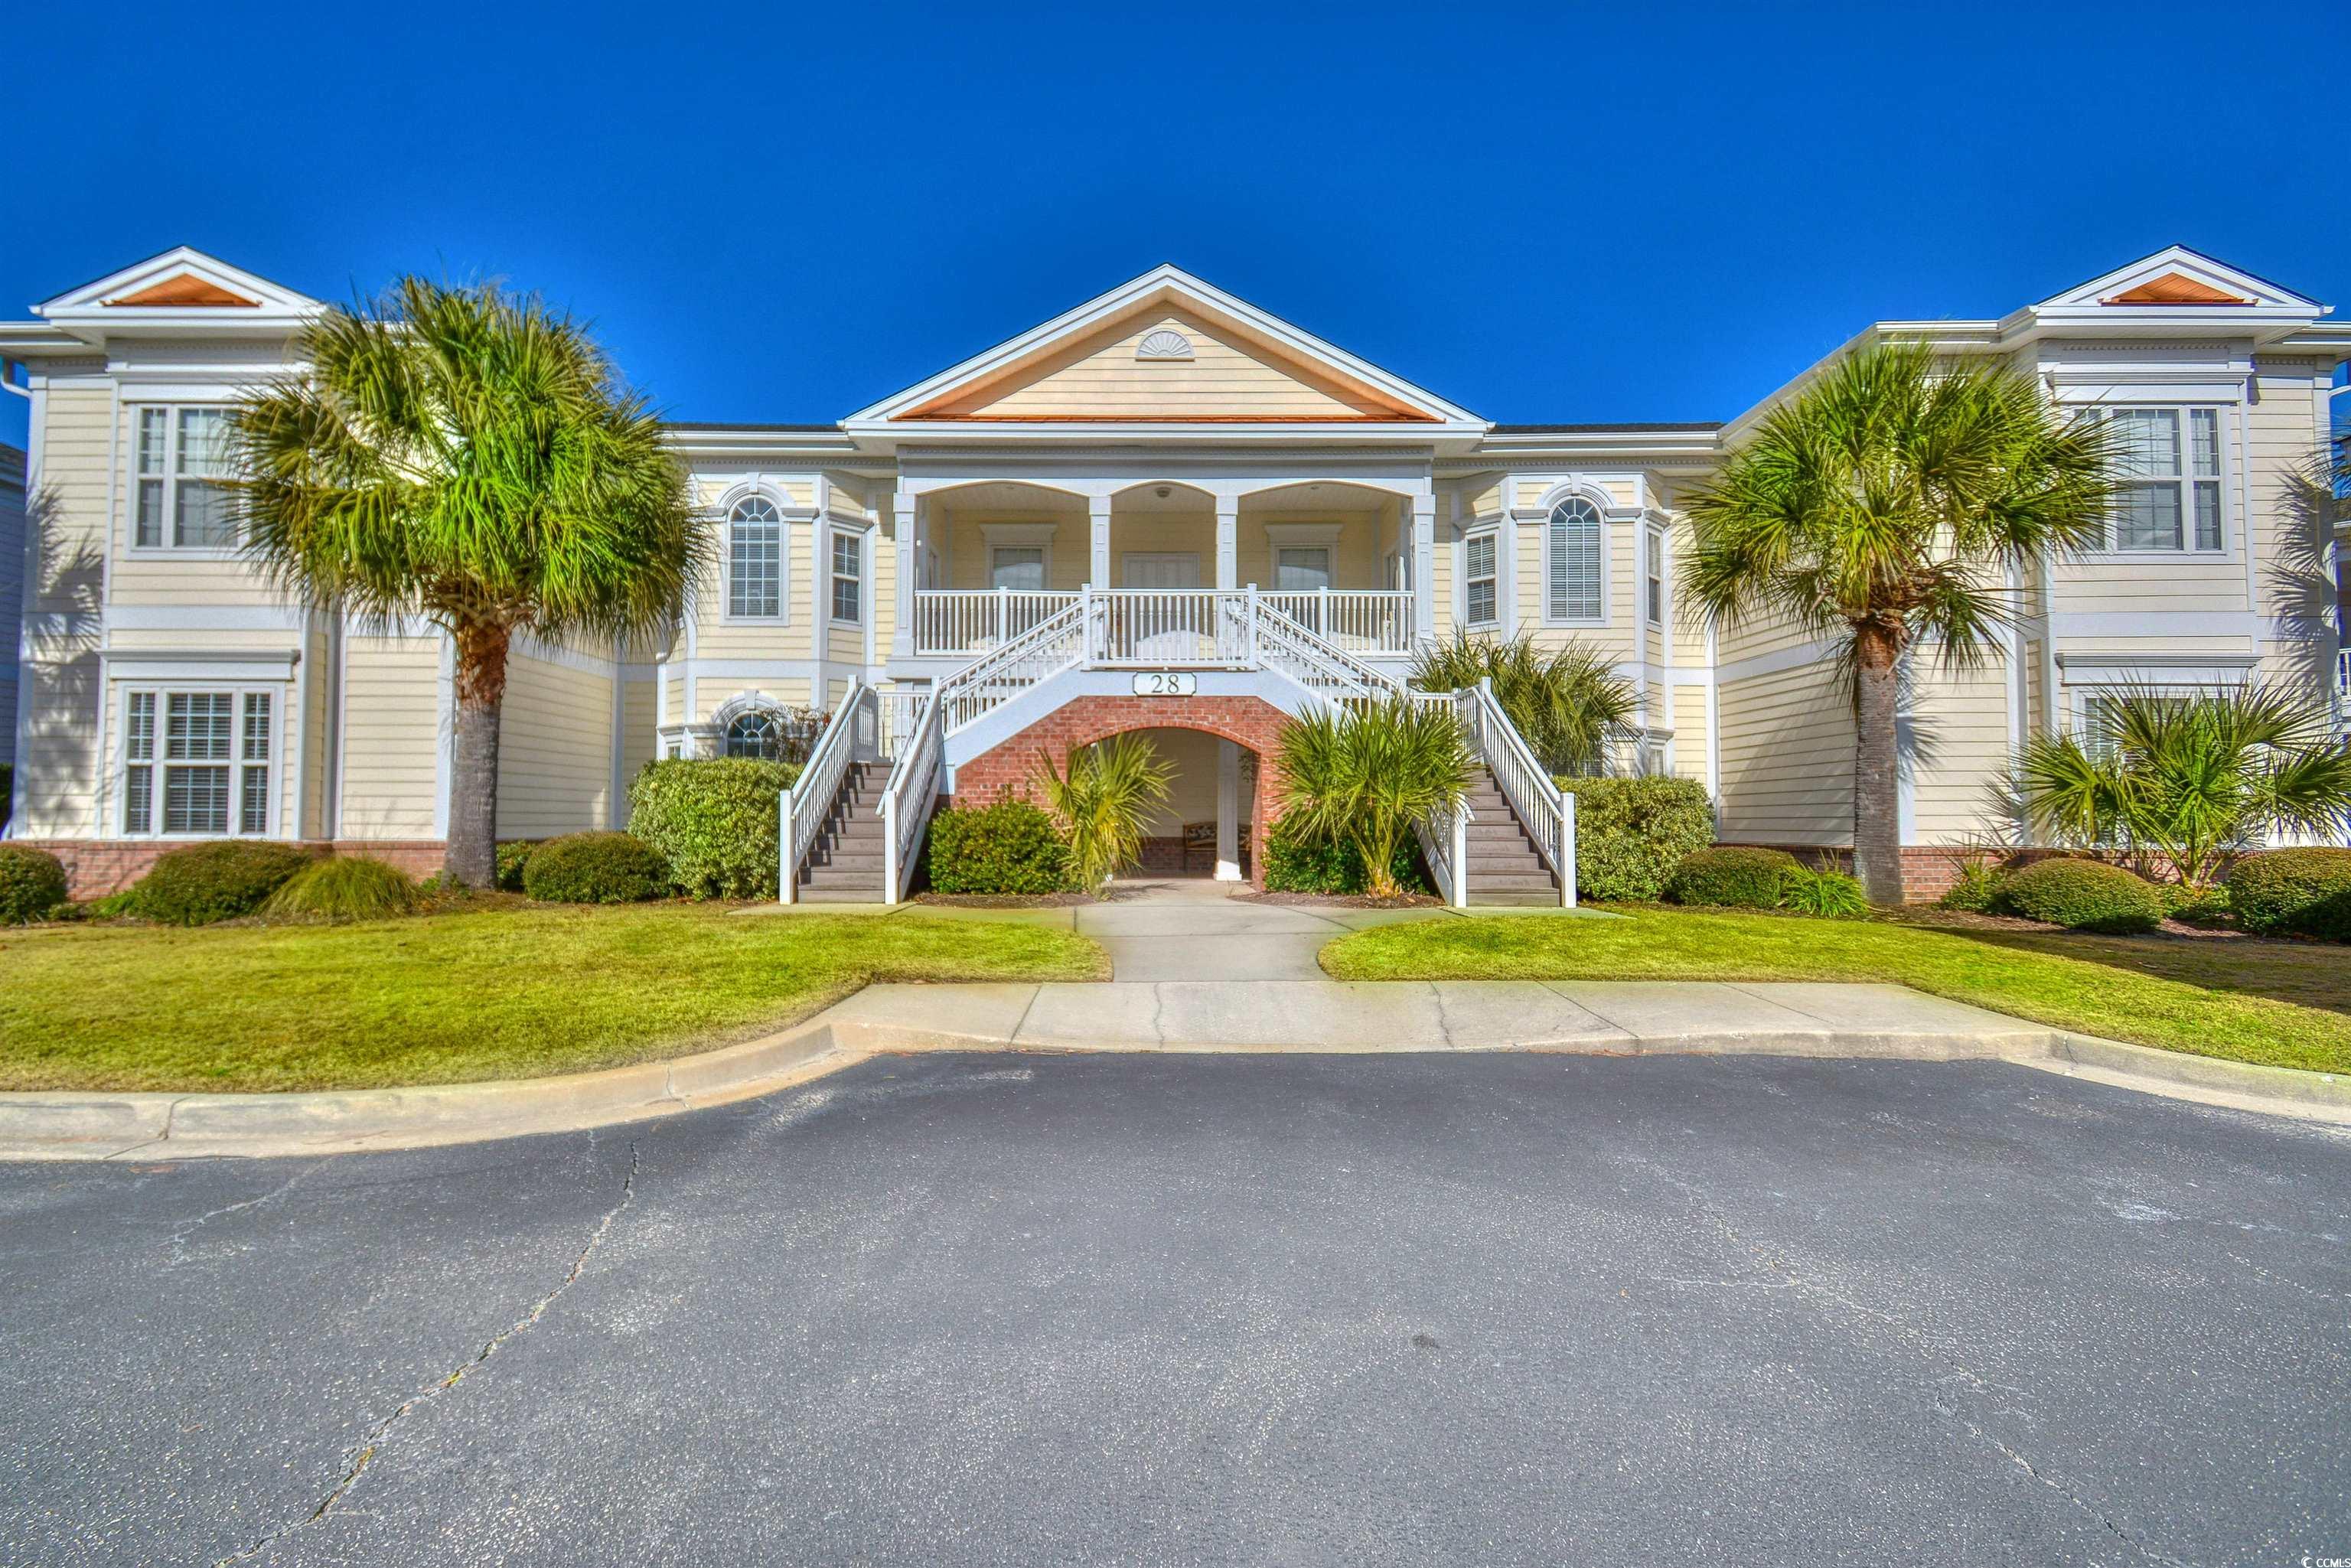 open house saturday, 1/27/24 12 to 3pm location, location this condo is located in the litchfield beach section of pawleys island. the avian forest community is well maintained community with access to the private beach at "litchfield by the sea: plus the community pool onsite. this beautiful freshly painted 1st floor 4 bedroom condo comes completely furnished. although it is a 4 bedroom condo you can live in the larger 2 bedroom side and rent the lockout 2 bedroom unit for additional income. it is currently on a rental program and the owners use it for 4 months in the winter. the hvac systems were replaced in 2019 & 2022 and the water heaters were replaced in october of 2021. it comes with a private 1 car garage and additional parking as well. everything you want is minutes away, dining, golf, shopping and of course your own private beach.